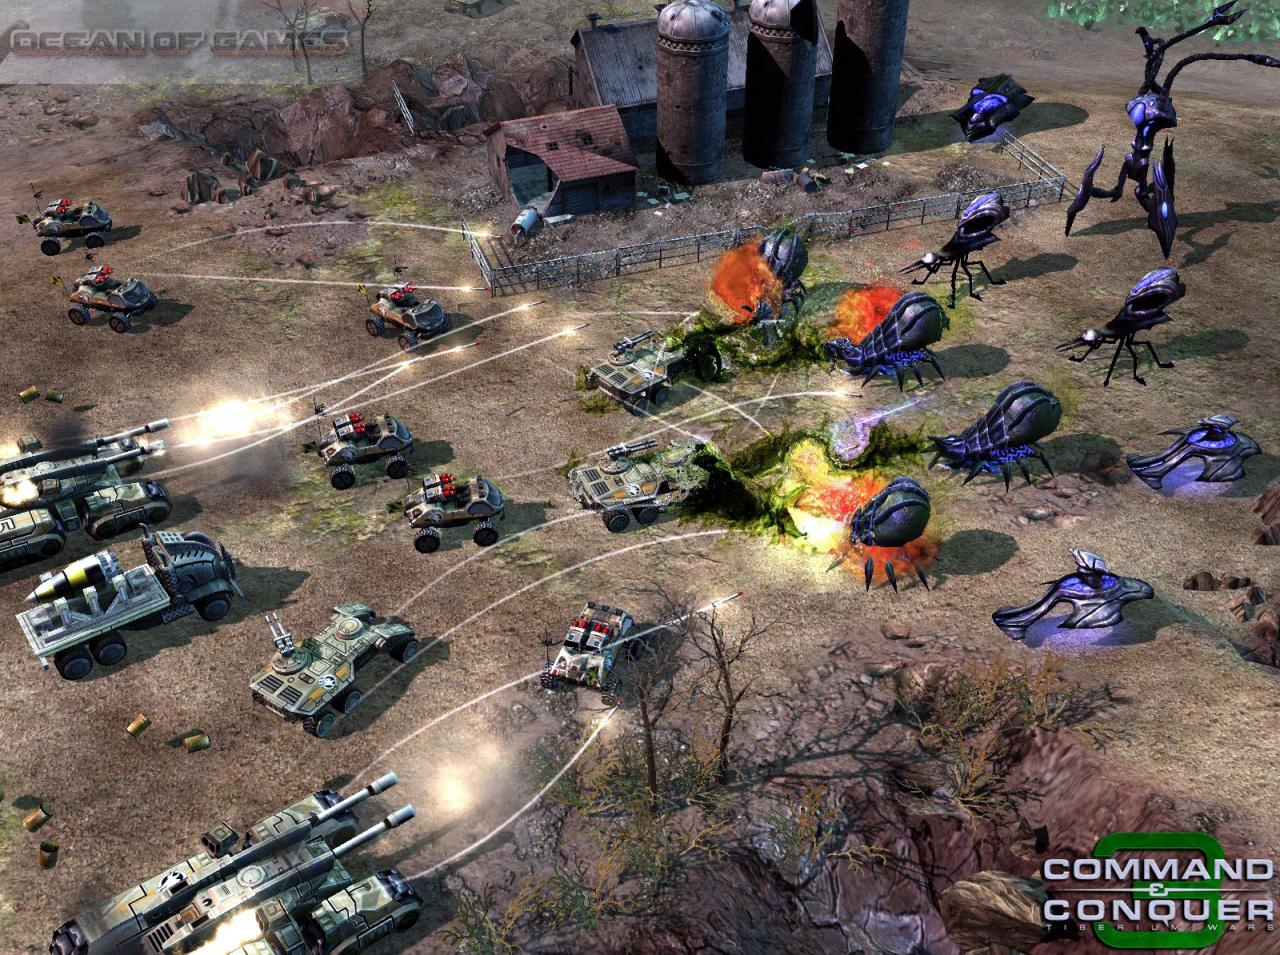 command-and-conquer-3-tiberium-wars-free-download-pc-games